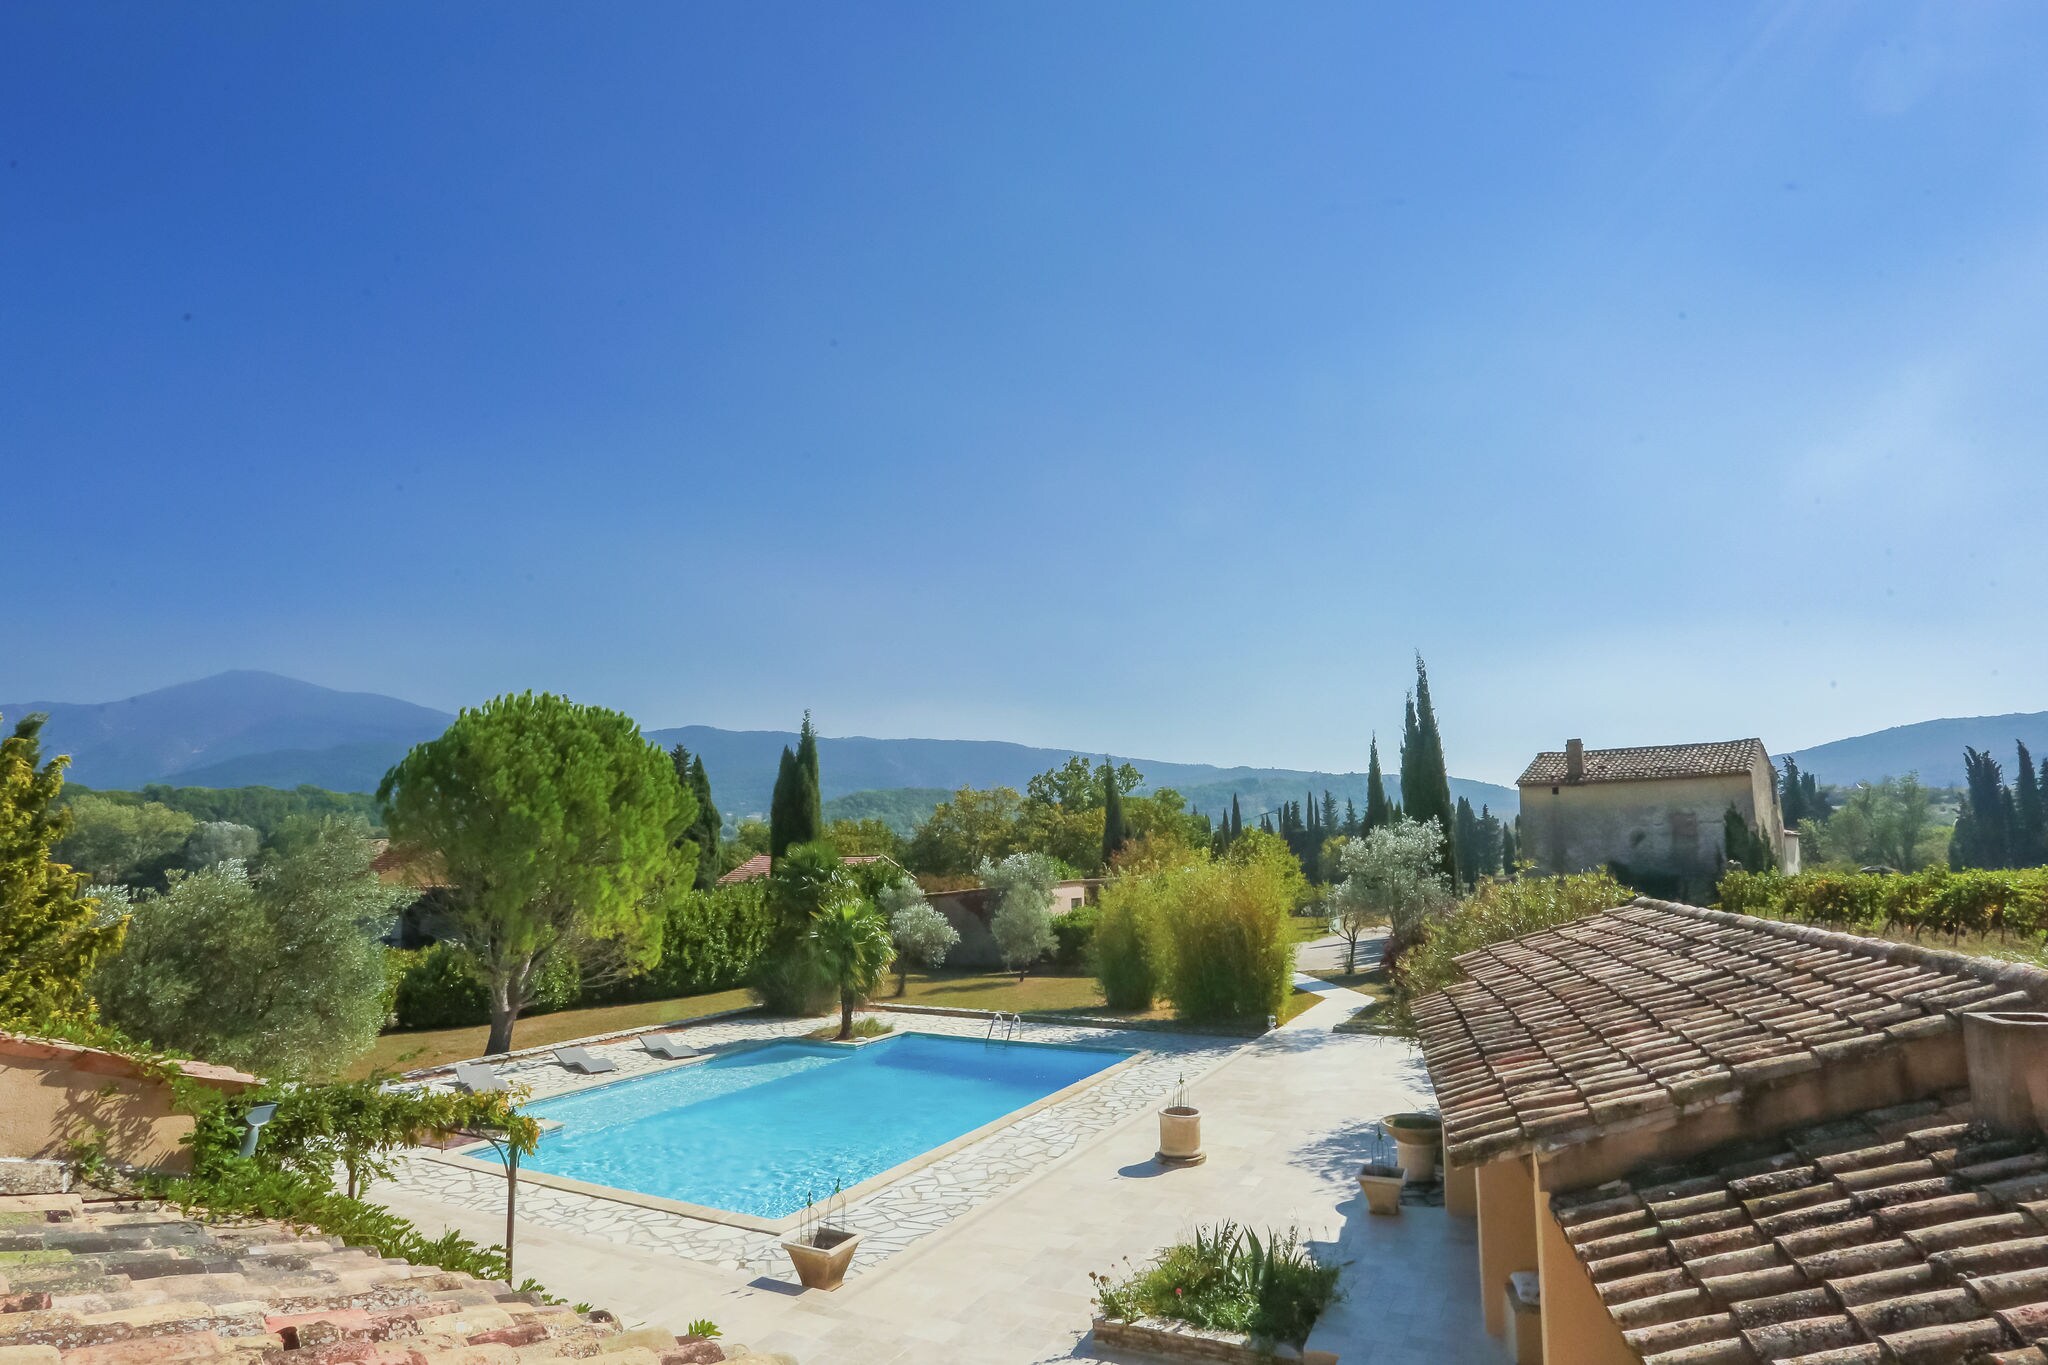 Delicious Provencal house on spacious private grounds with private pool